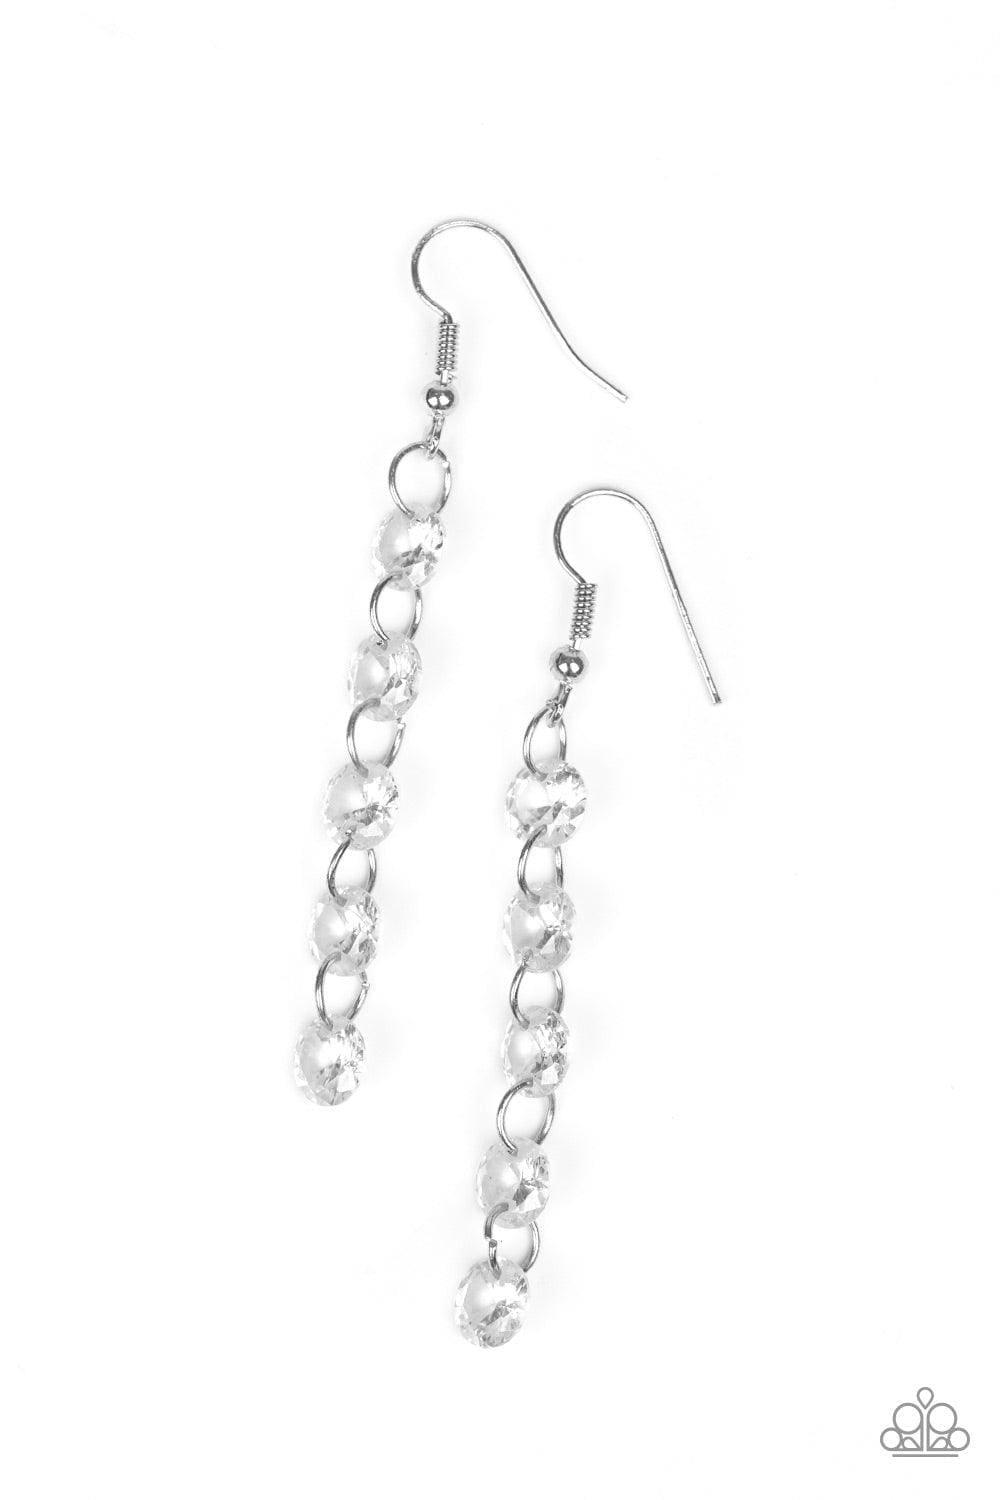 Paparazzi Accessories - Trickle-down Effect - White Earrings - Bling by JessieK